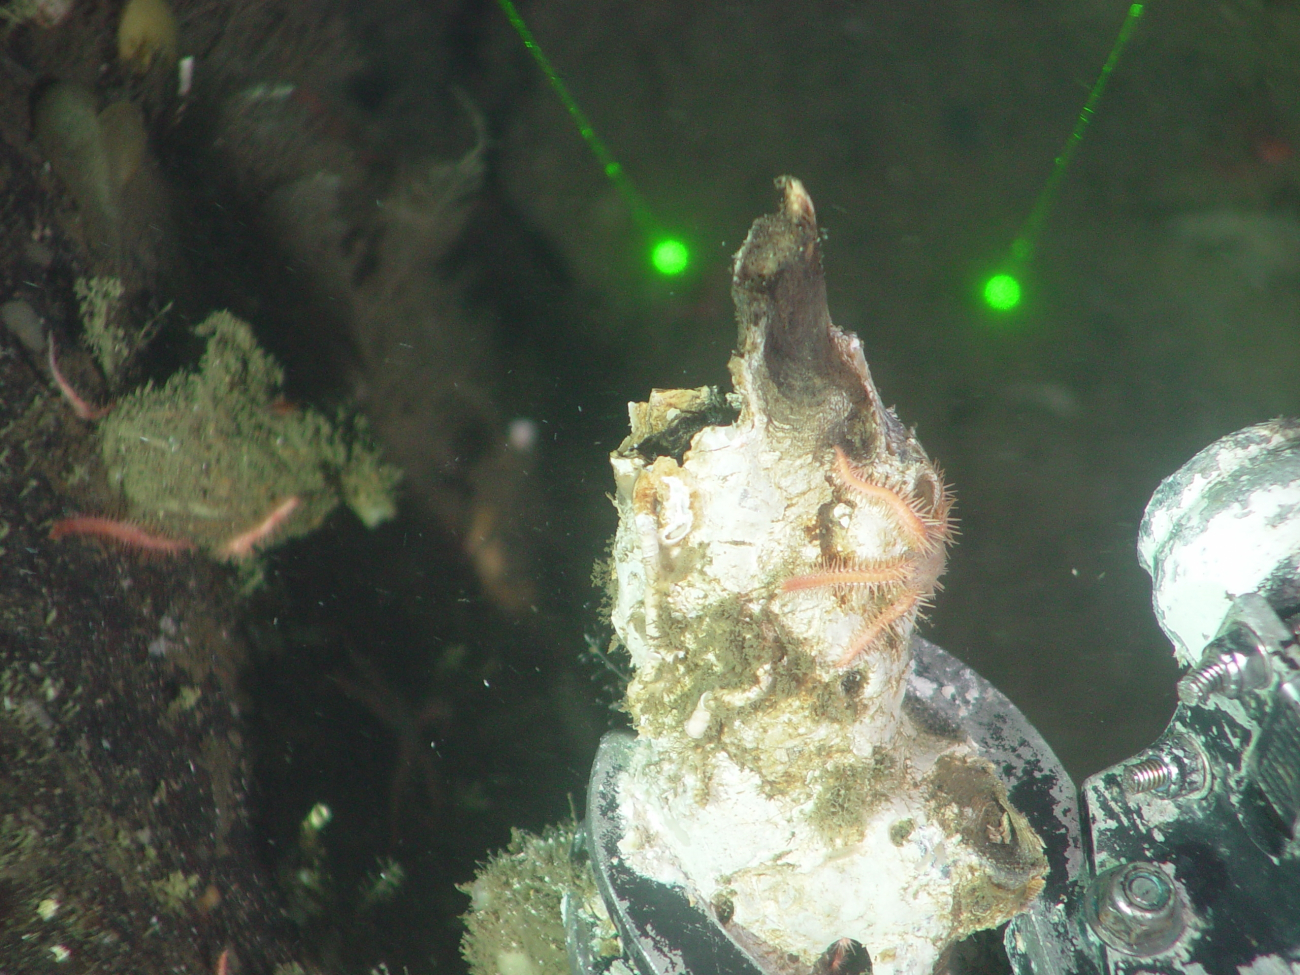 Dead coral stalk gathered by arm of ROV